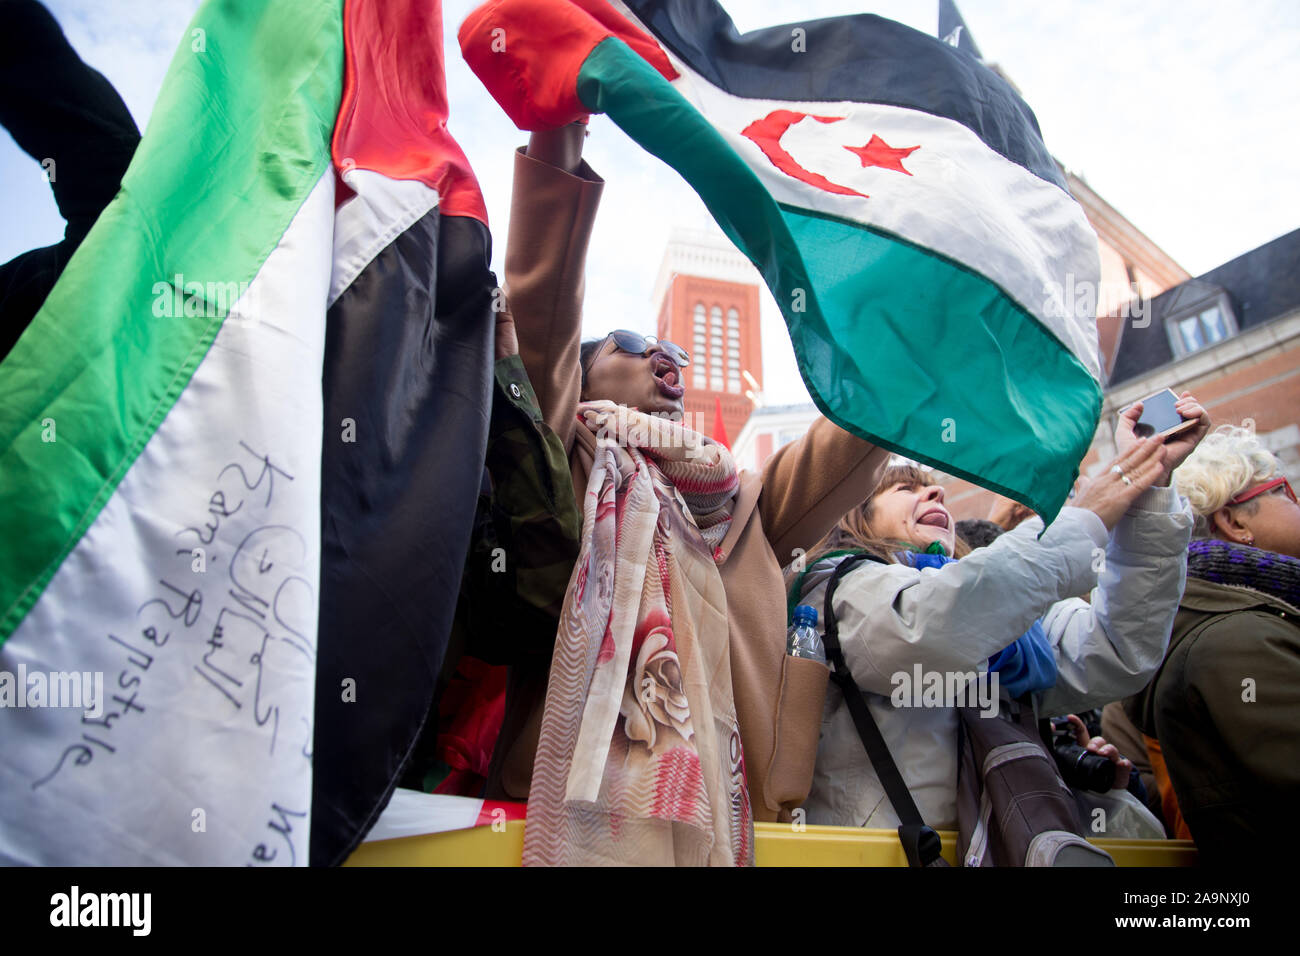 Madrid, Spain. 16th Nov, 2019. Saharawi woman with flags during the demonstration.Thousands of Saharawis arrive from all over Spain to demand the end of Morocco's occupation in Western Sahara, the freedom of political prisoners, in support of the Polisario Front and to demand solutions from the Spanish government. Western Sahara was a Spanish colony until 1976 where Spain left the territory. Later Morocco occupied part of Western Sahara and still part of the Saharawi population lives in refugee camps in the desert in Algeria and in Spain. Credit: SOPA Images Limited/Alamy Live News Stock Photo